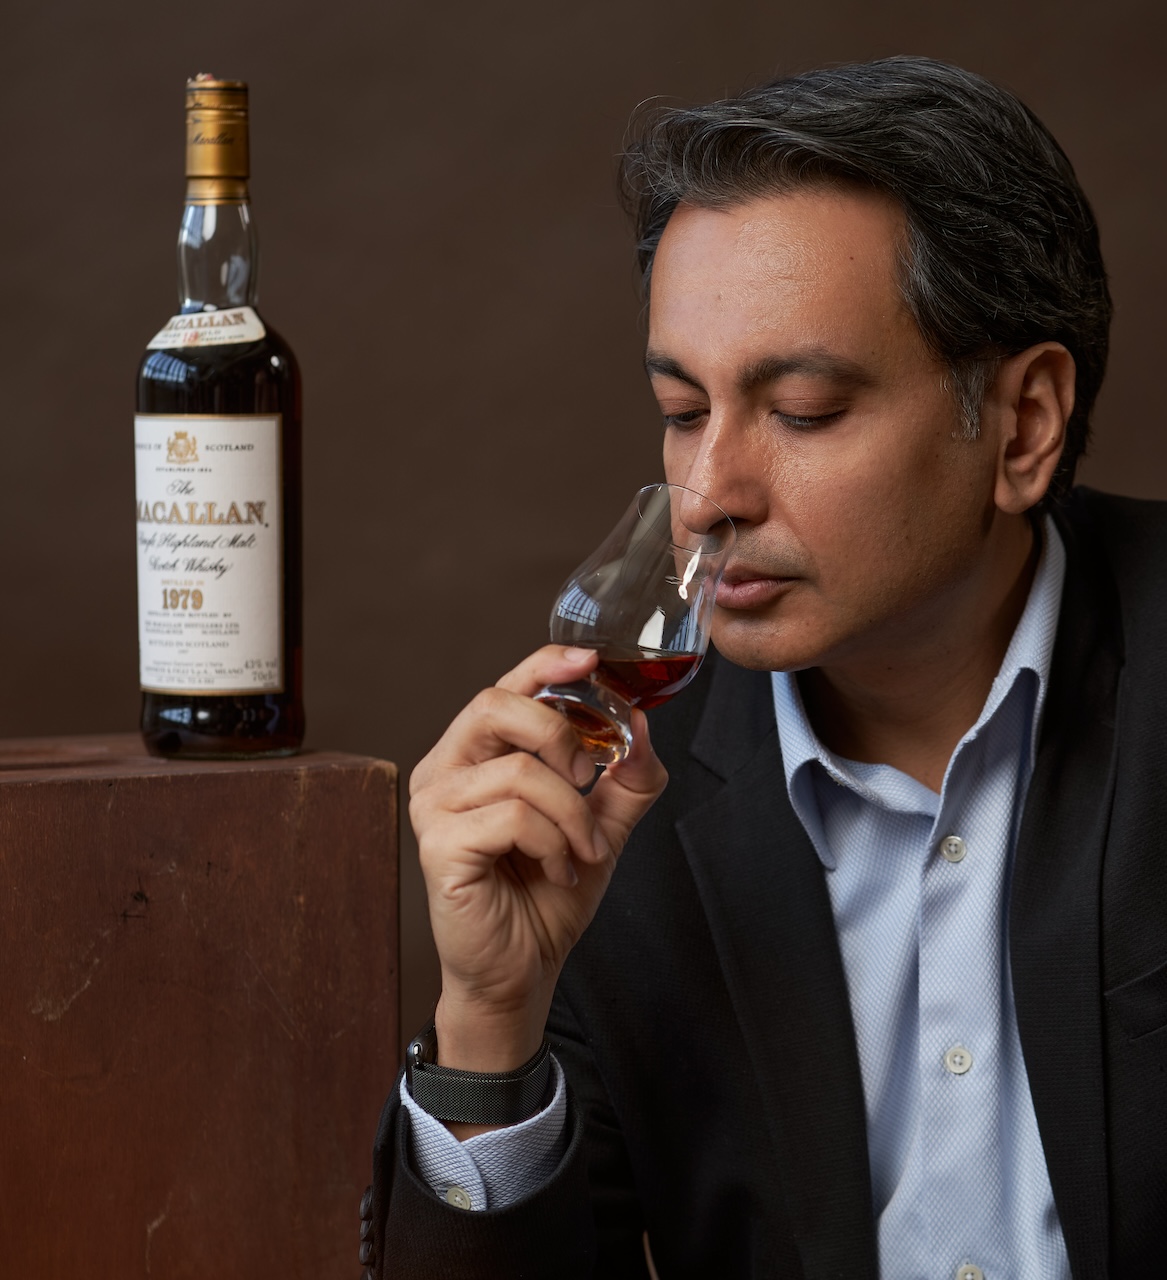 Rickesh Kishnani not only loves whisky but has also learned how to harness the spirit's wealth generating potential. He talks with Nick Walton about this favourite drams and his own journey of whisky discovery.